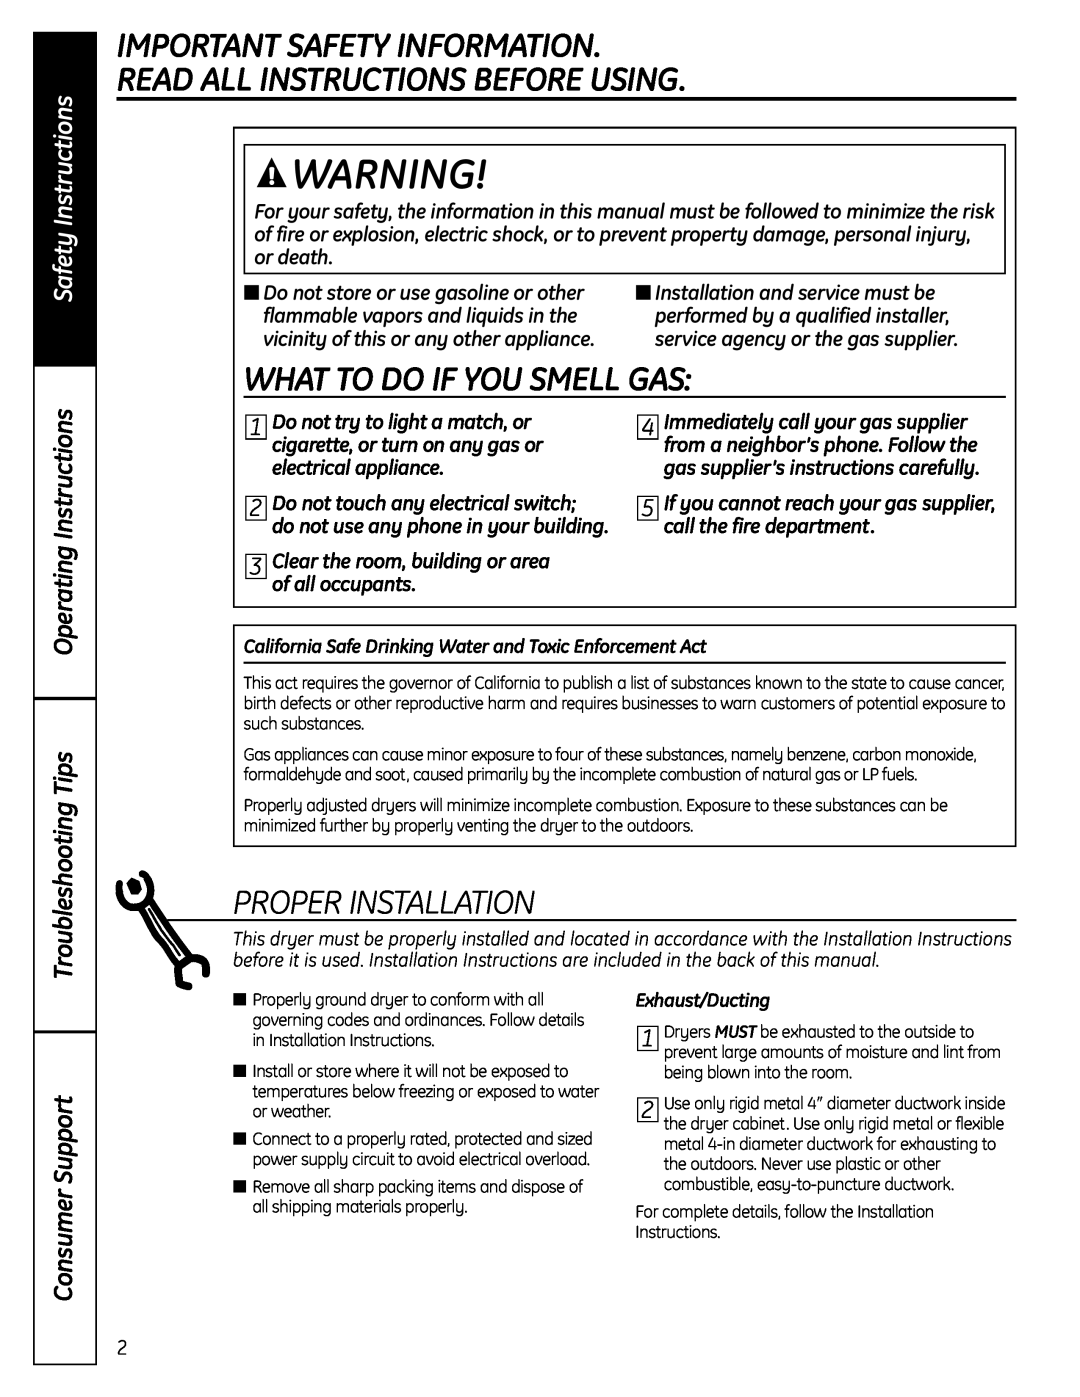 GE UPVH890 Important Safety Information Read All Instructions Before Using, What To Do If You Smell Gas, Consumer Support 